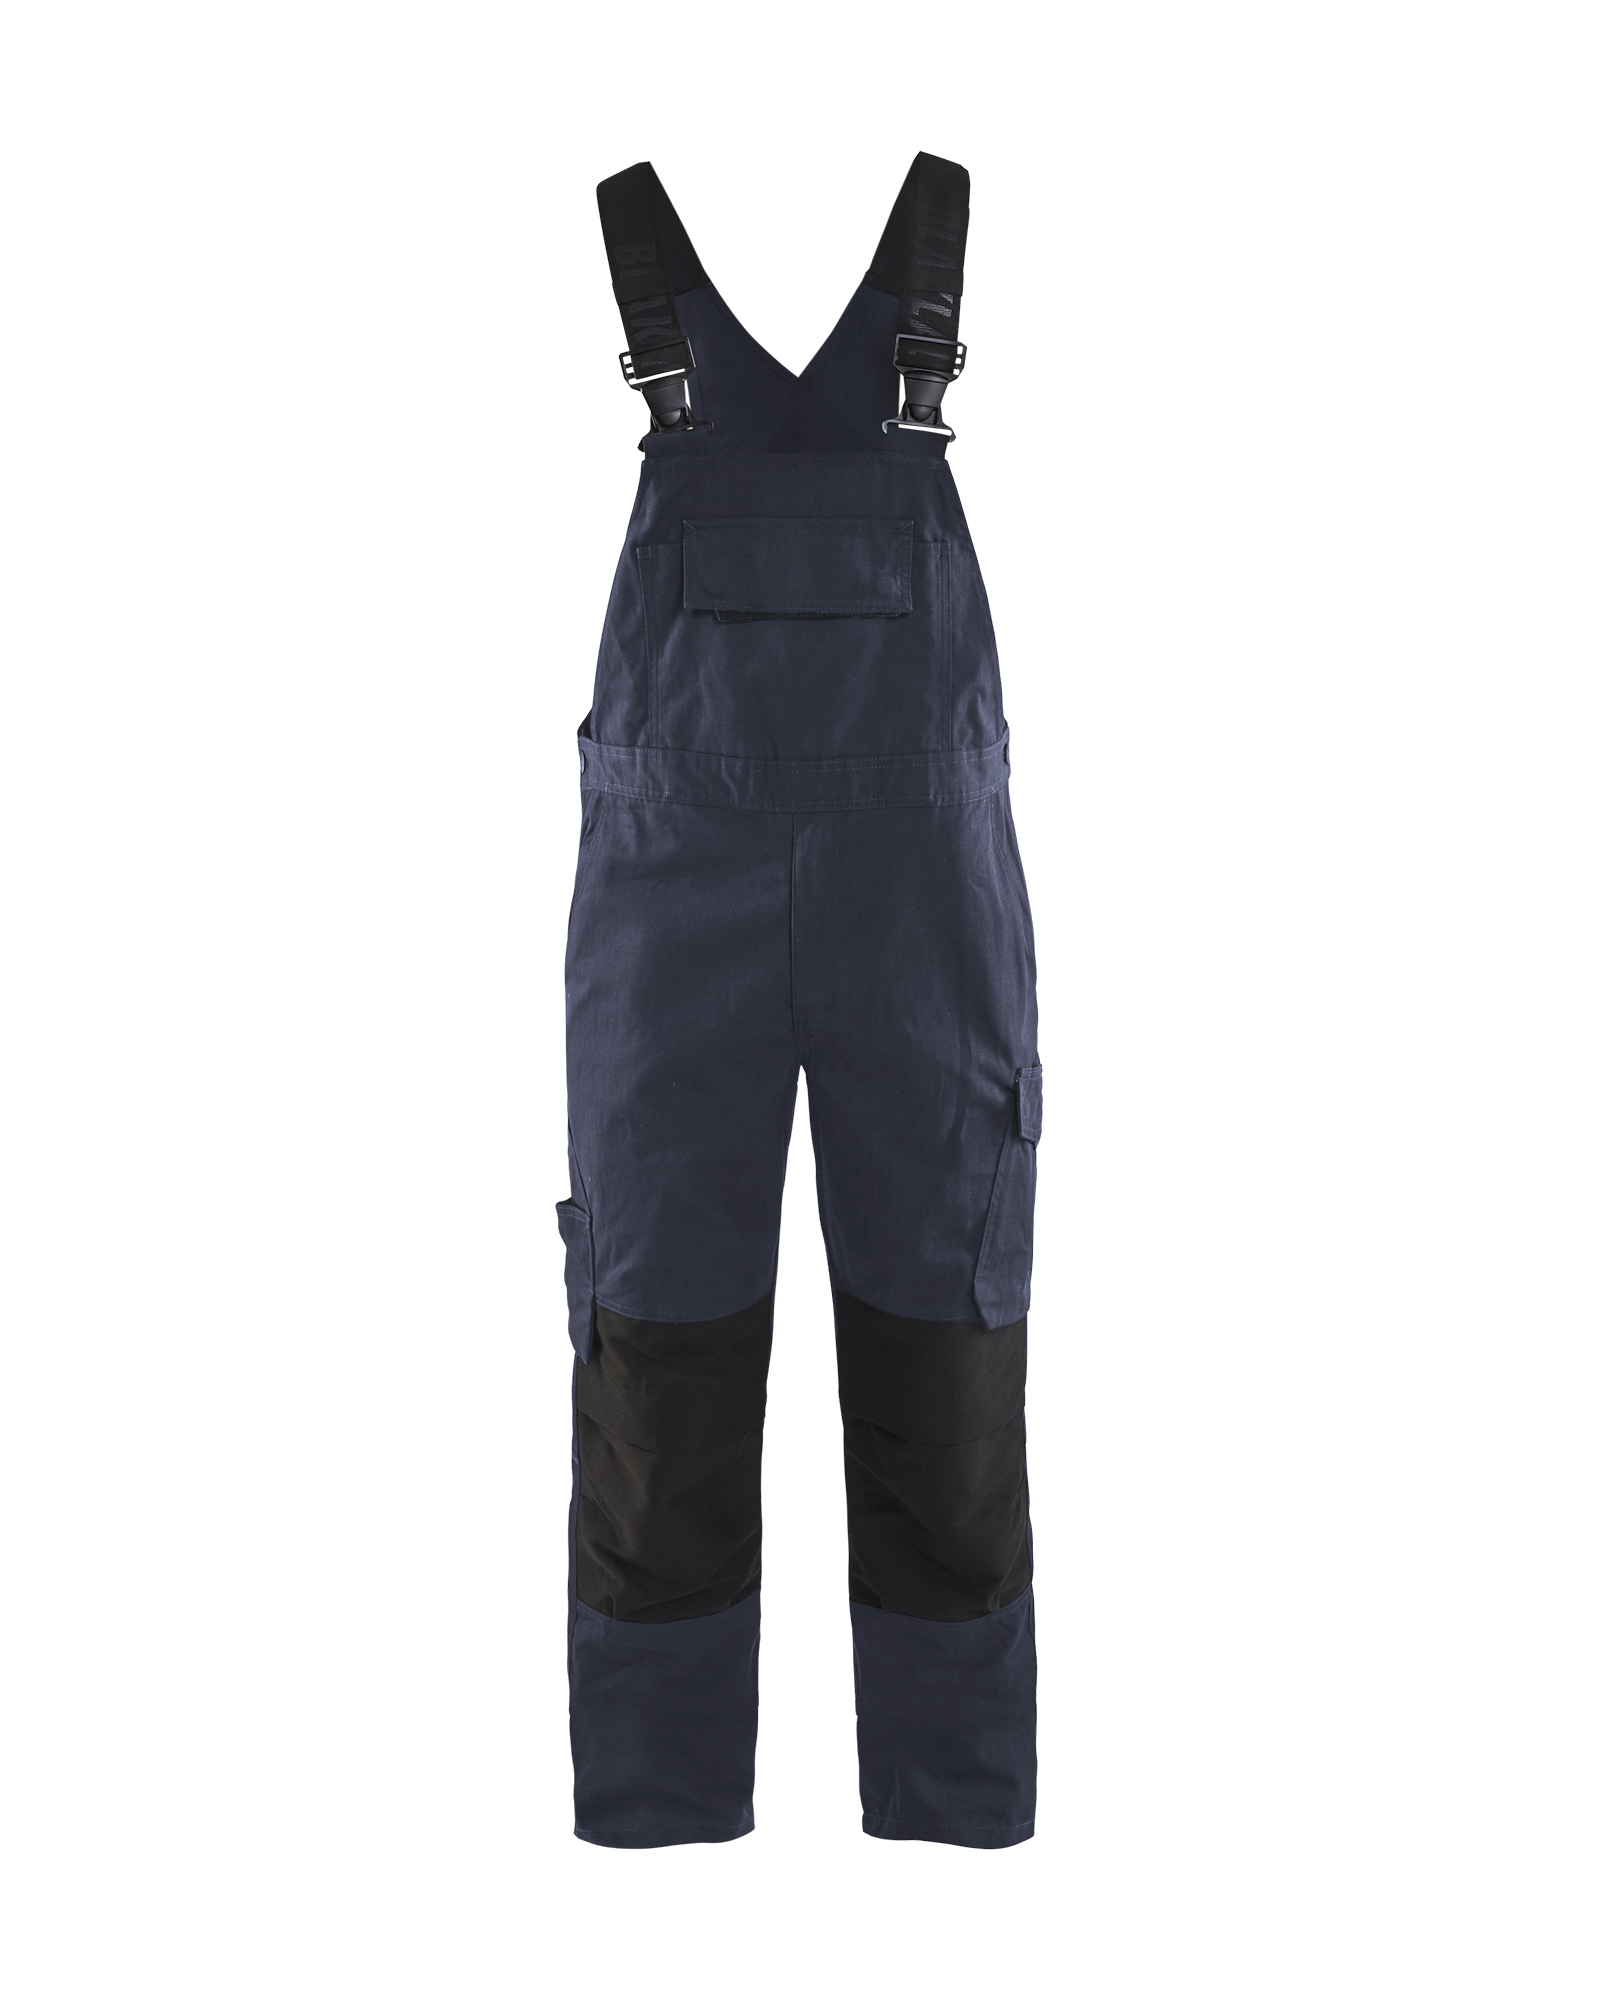 Bib overall with stretch